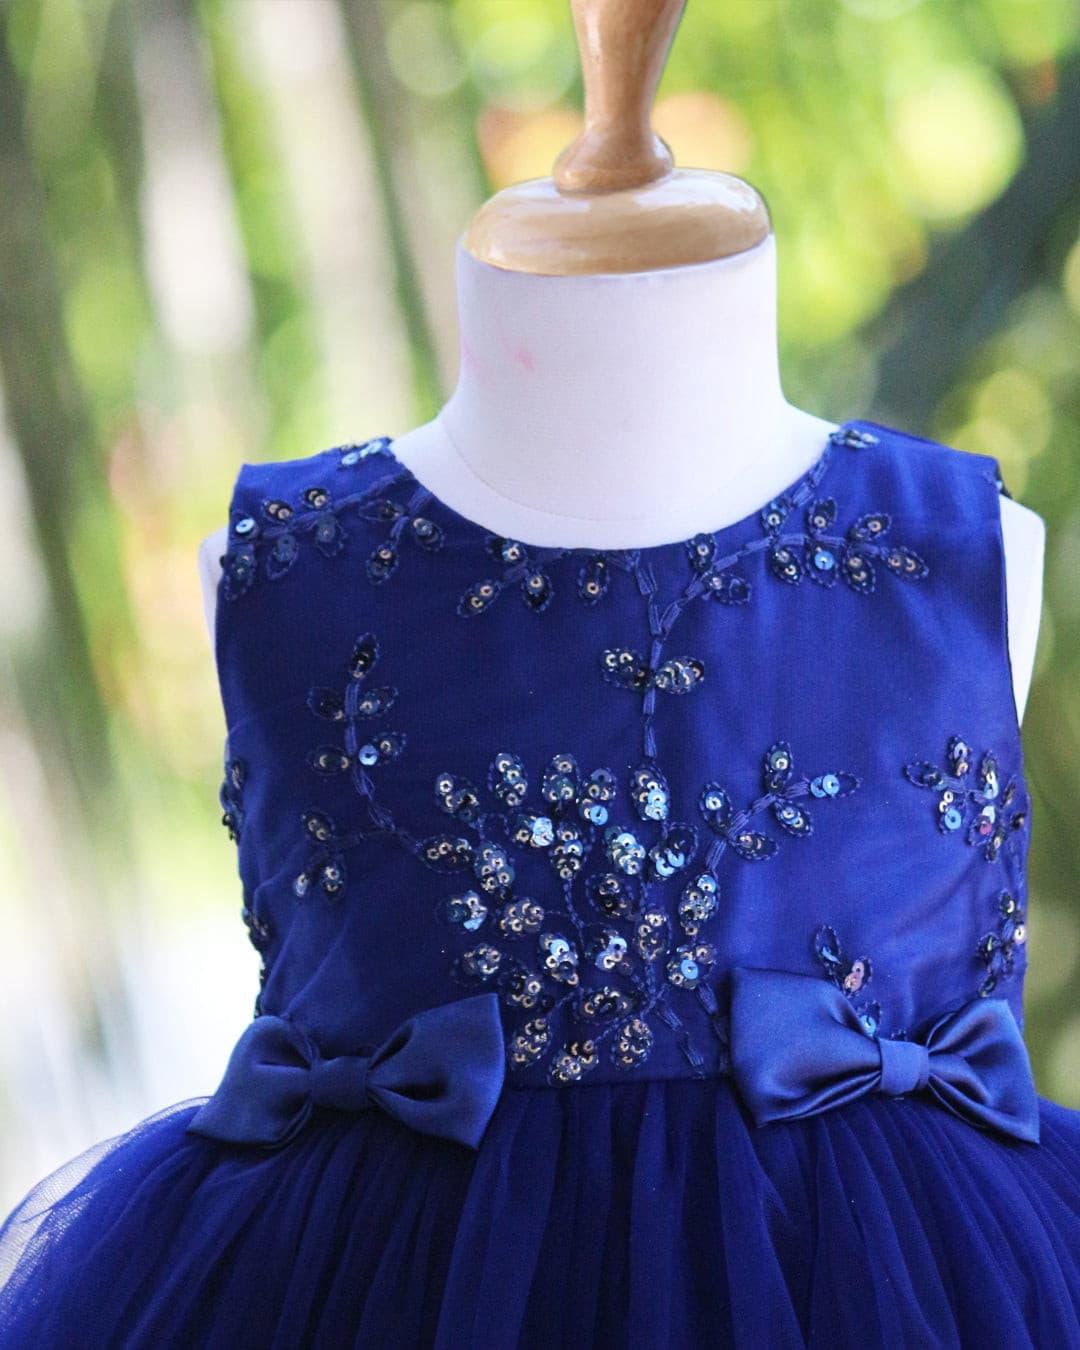 Navyblue Sequins Embroidery Sleeveless Frock

Material:  Navyblue Sequins Frock is made with soft mono net with embroidery sequins material as border on the end portion. Yoke portion is designed with embroider